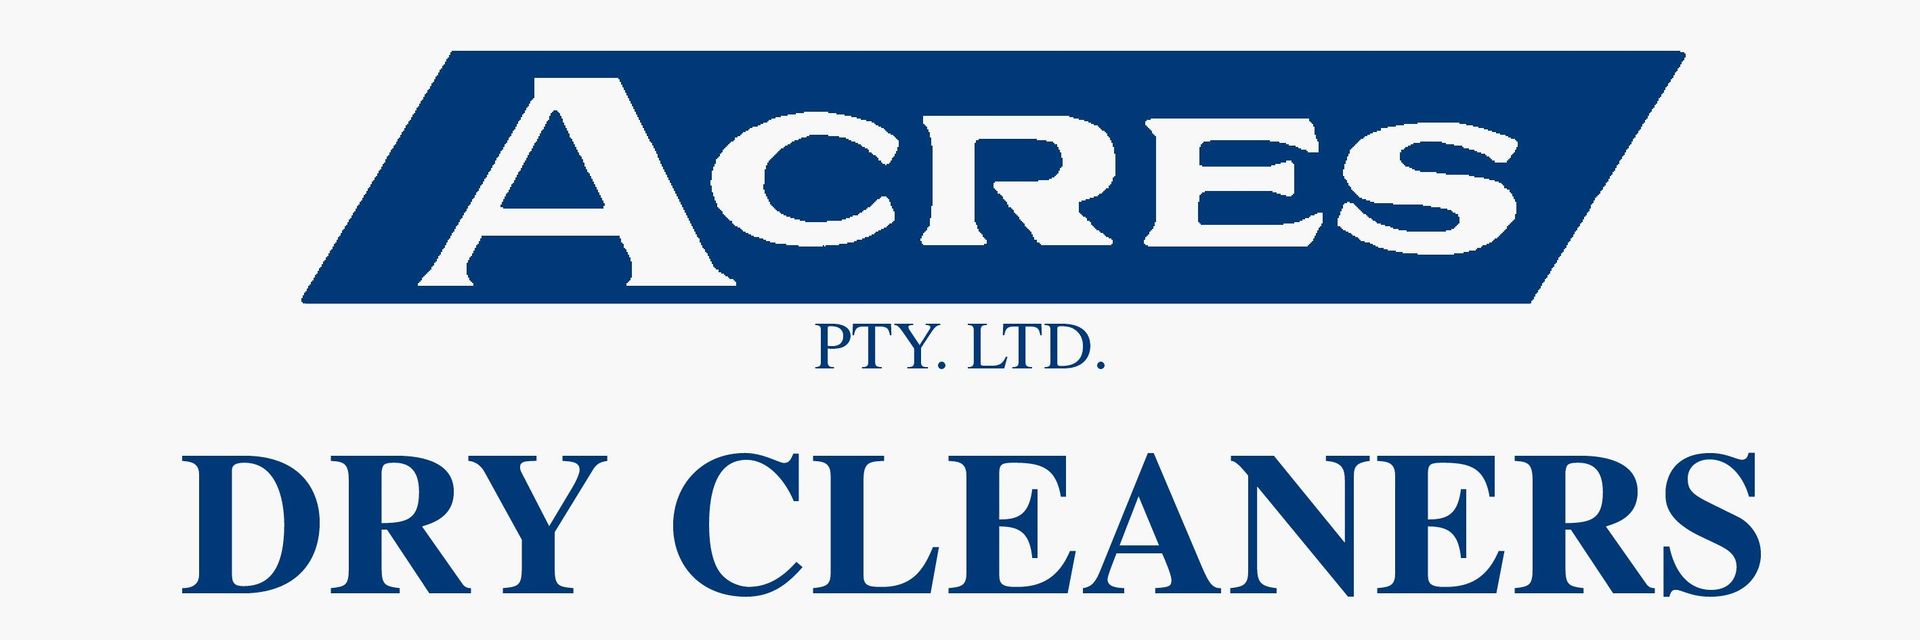 acres dry cleaning logo